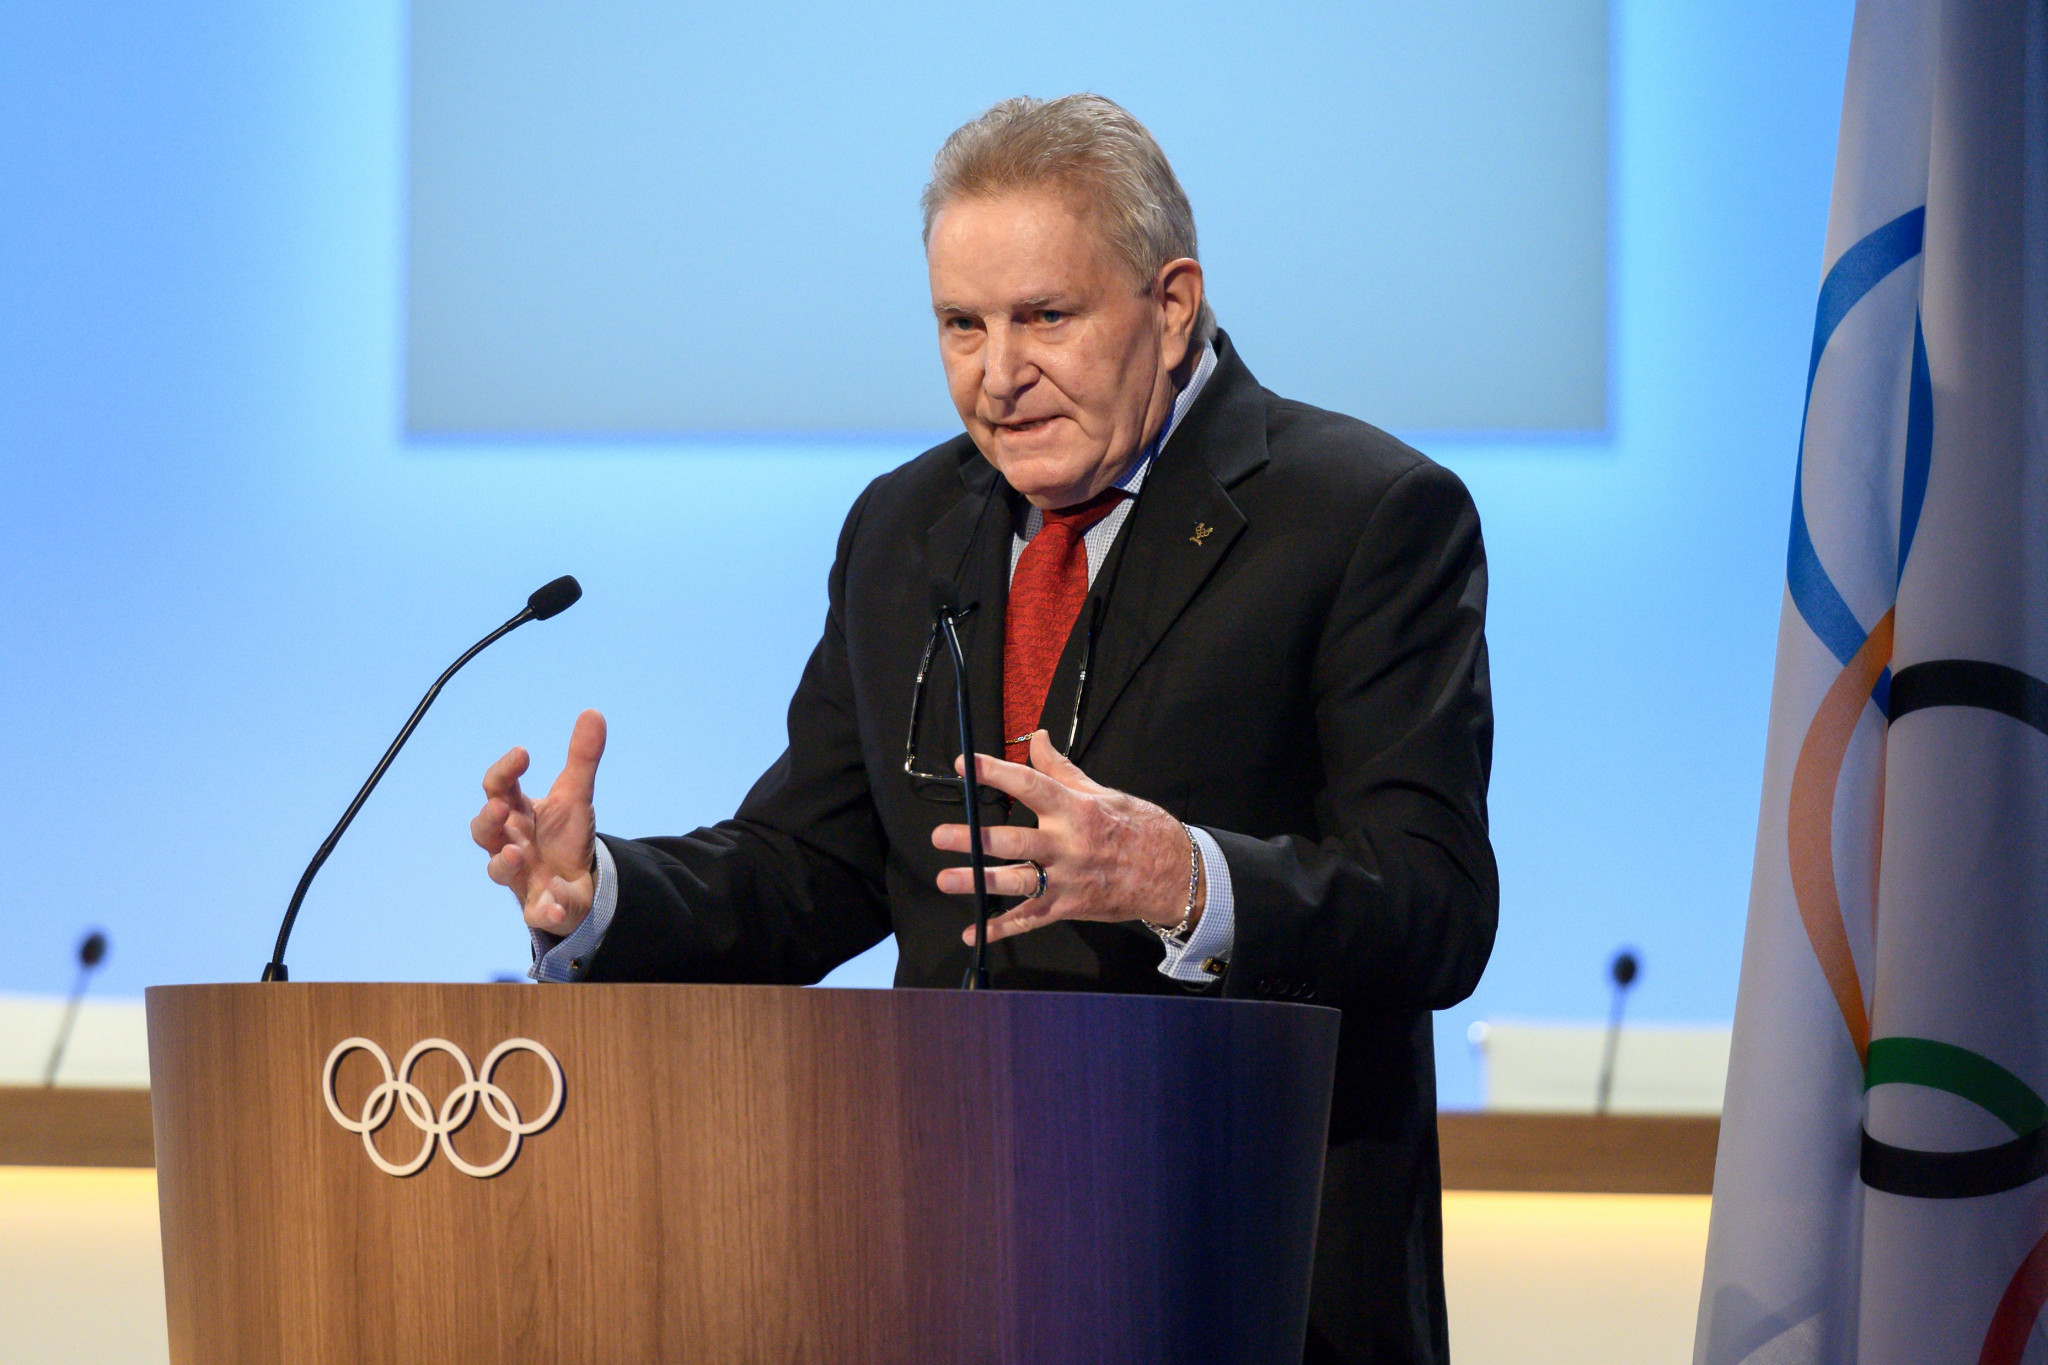 Denis Oswald was among many speakers on anti-doping issues at the IOC Session ©Getty Images